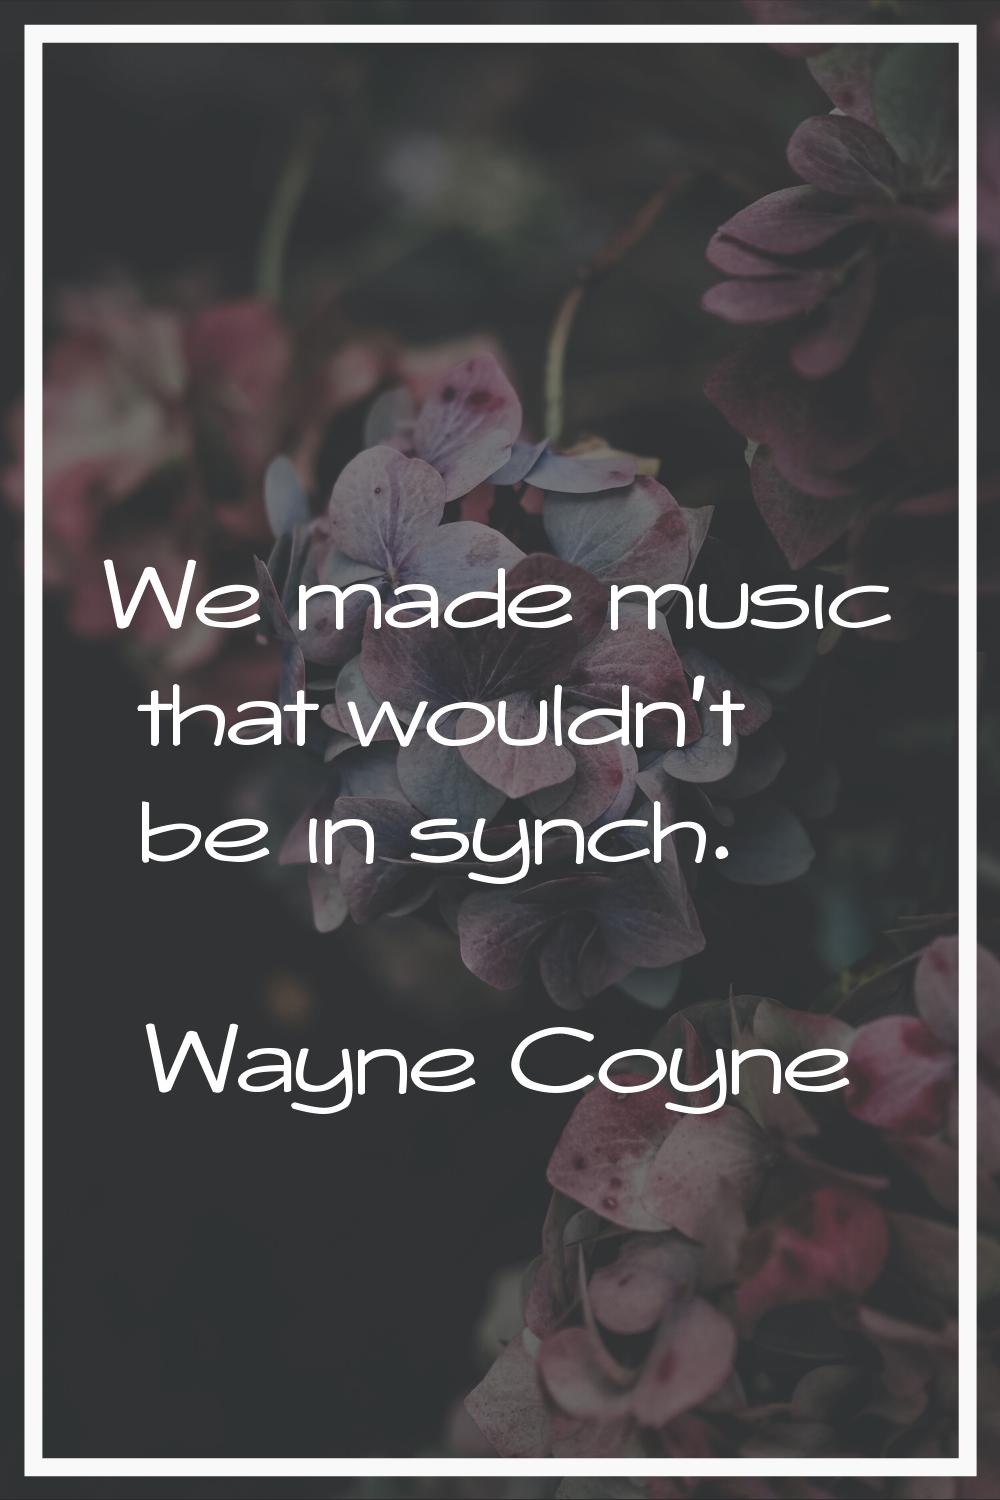 We made music that wouldn't be in synch.